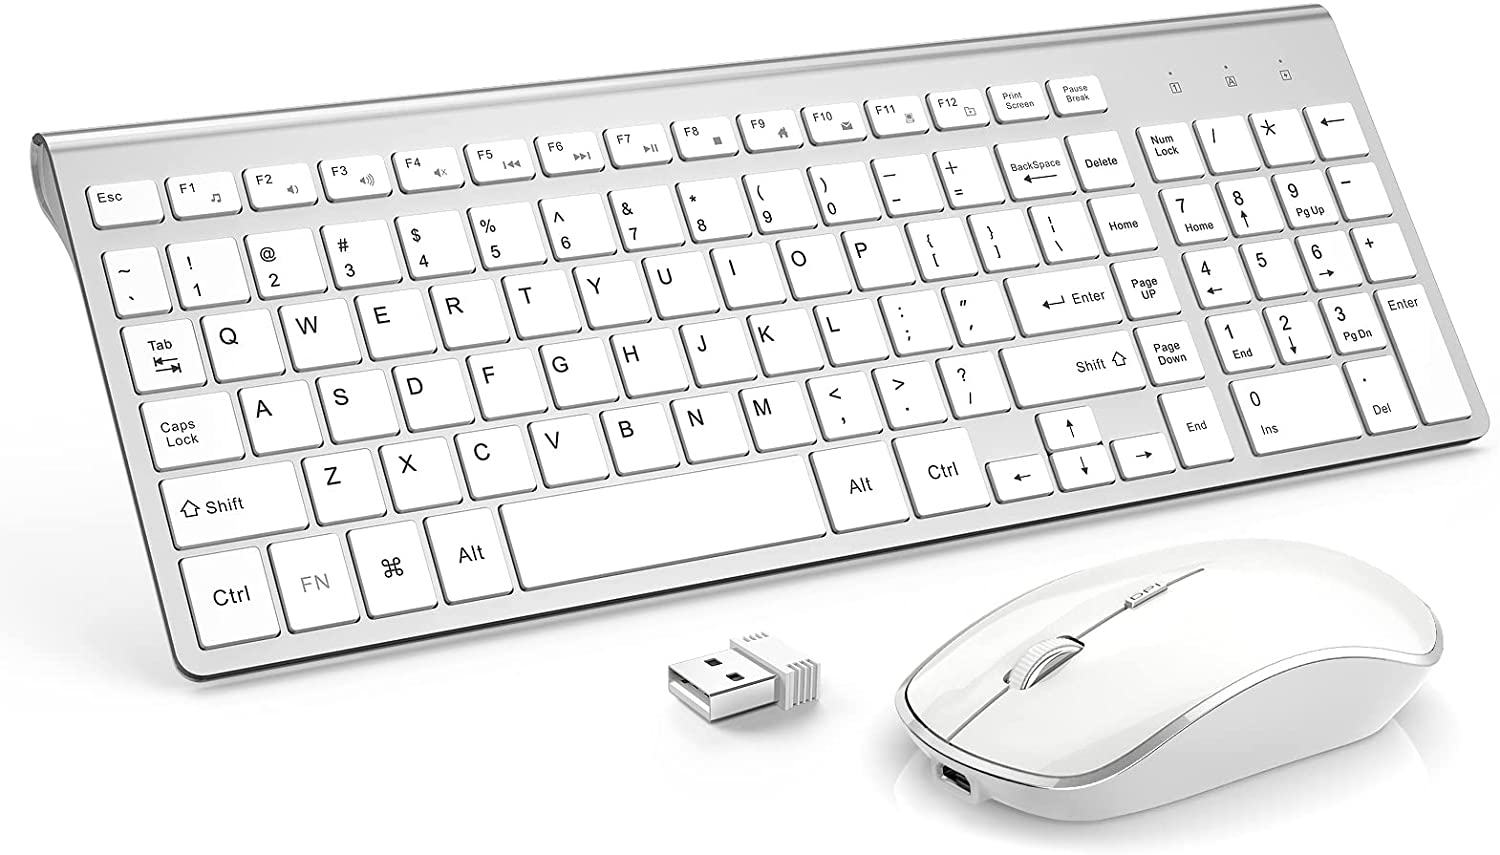 Rechargeable Wireless Keyboard Mouse- J JOYACCESS Ultra Slim Portable Full Size White Keyboard Mouse Combo 2.4G Quiet Keyboard and Mouse with Long Battery Life for Laptop,Desktop,PC,Computer,Windows
